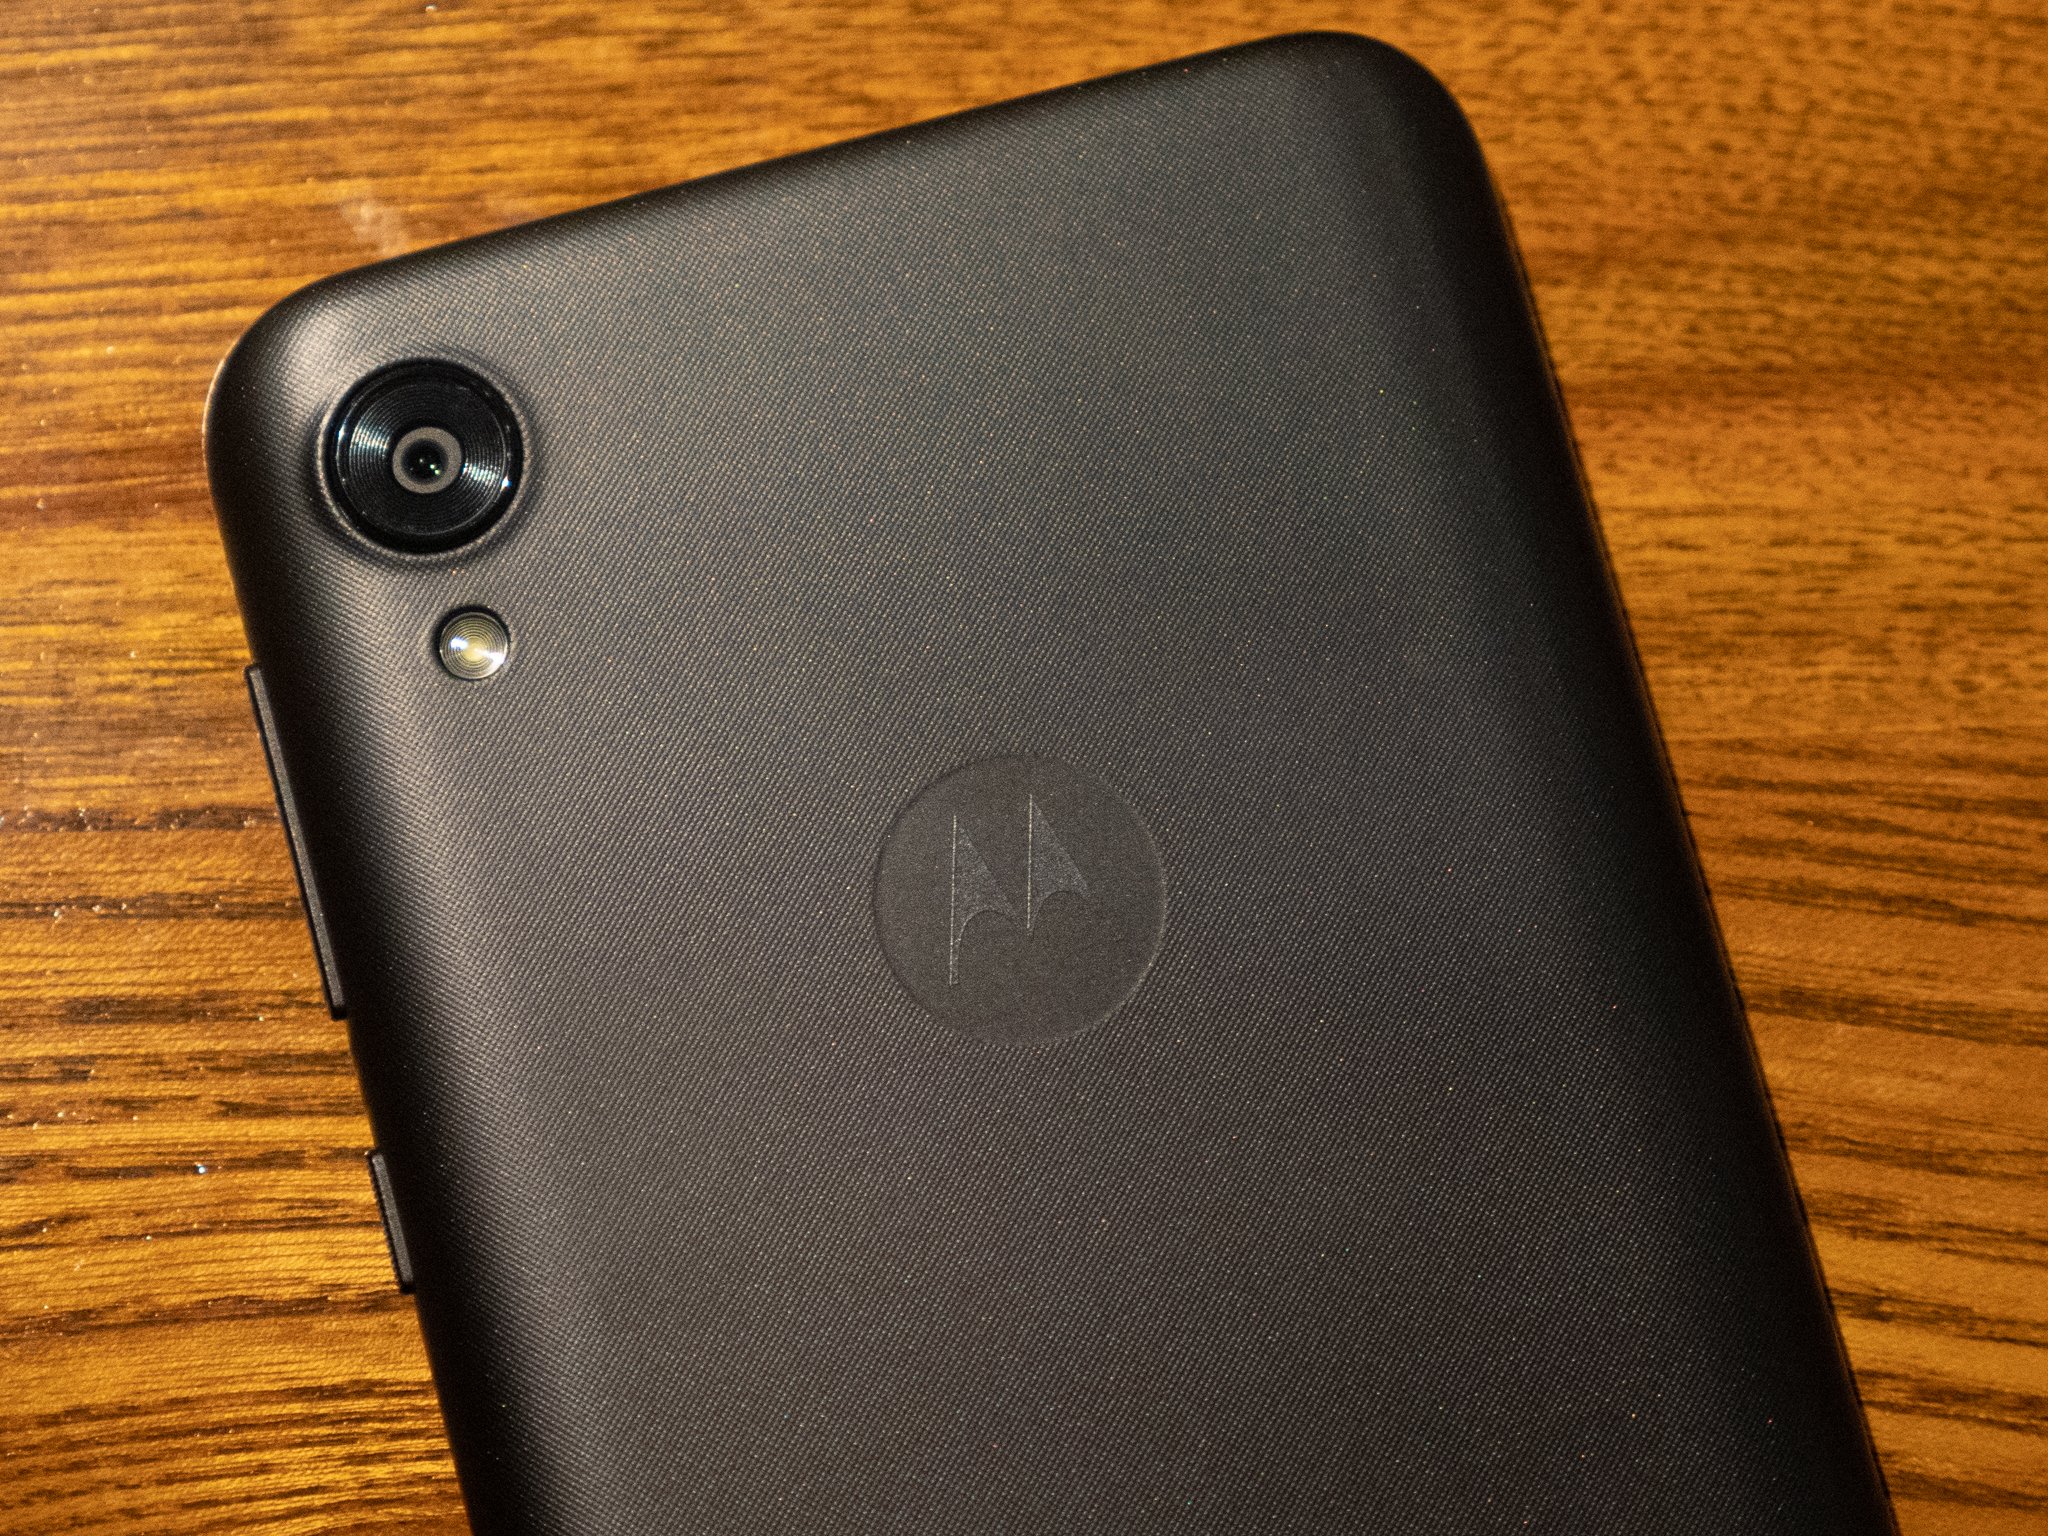 Moto E6 unveiled with Snapdragon 435 and removable 3000mAh